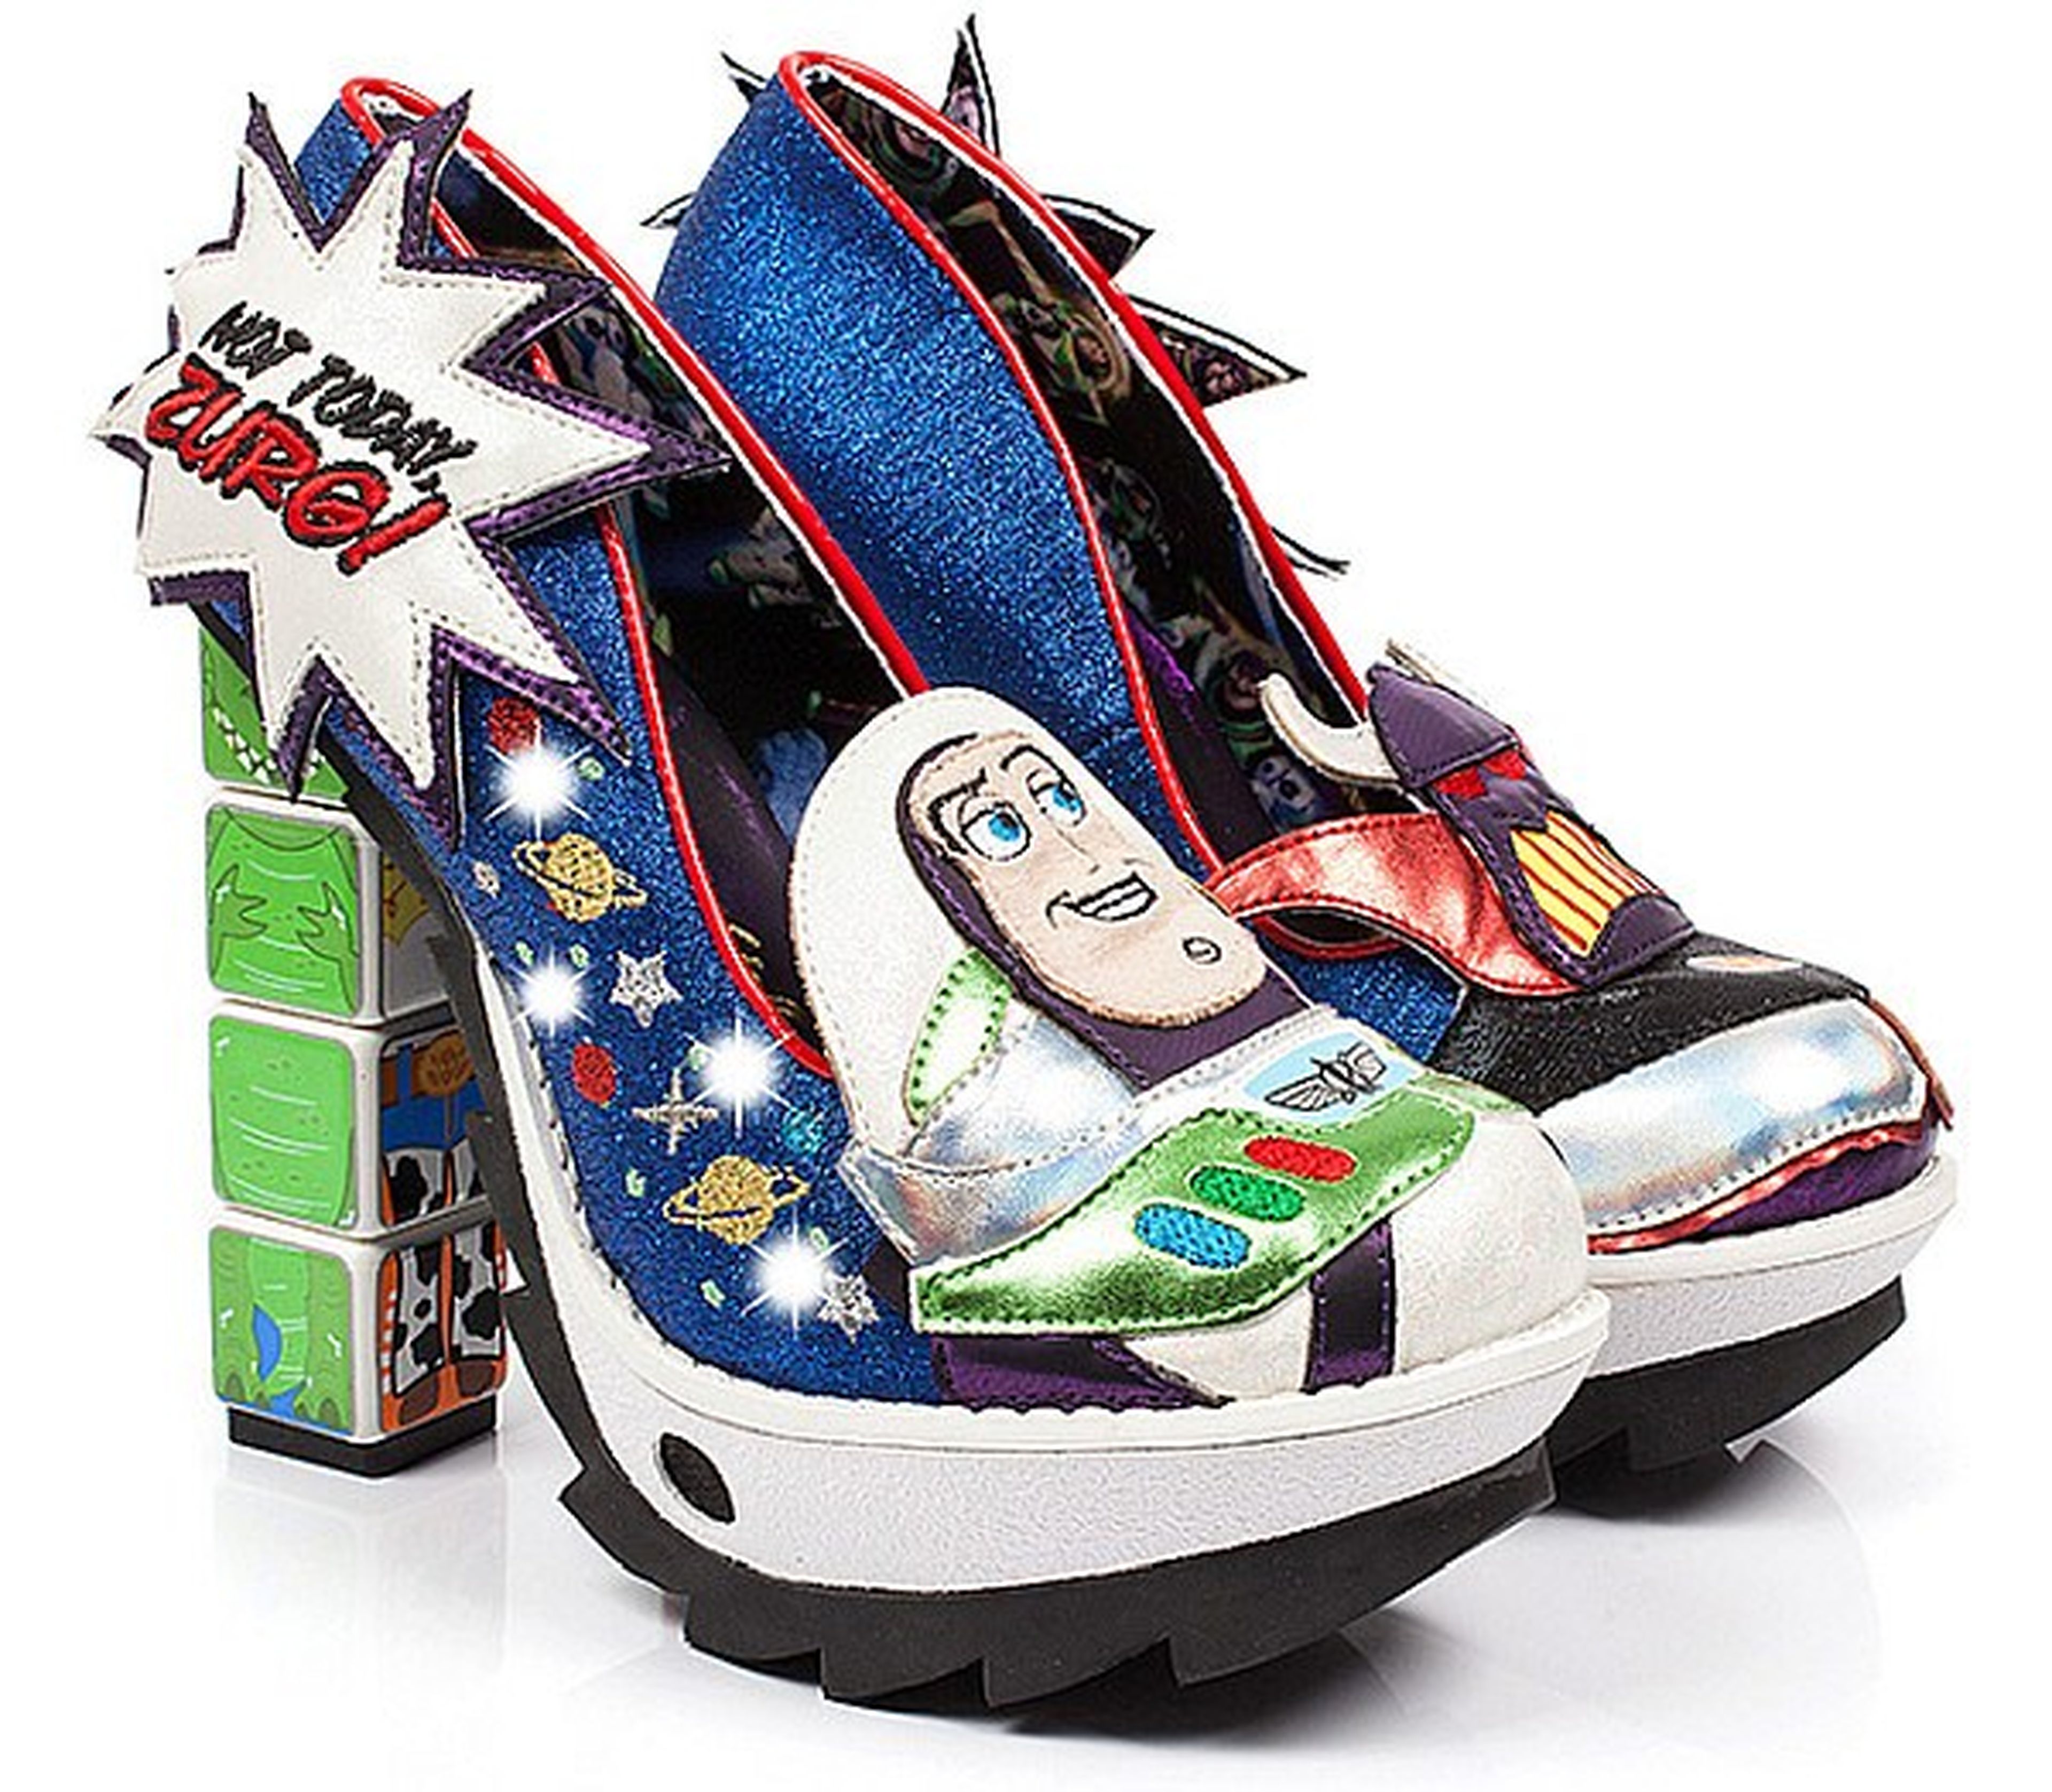 Tacones Toy Story